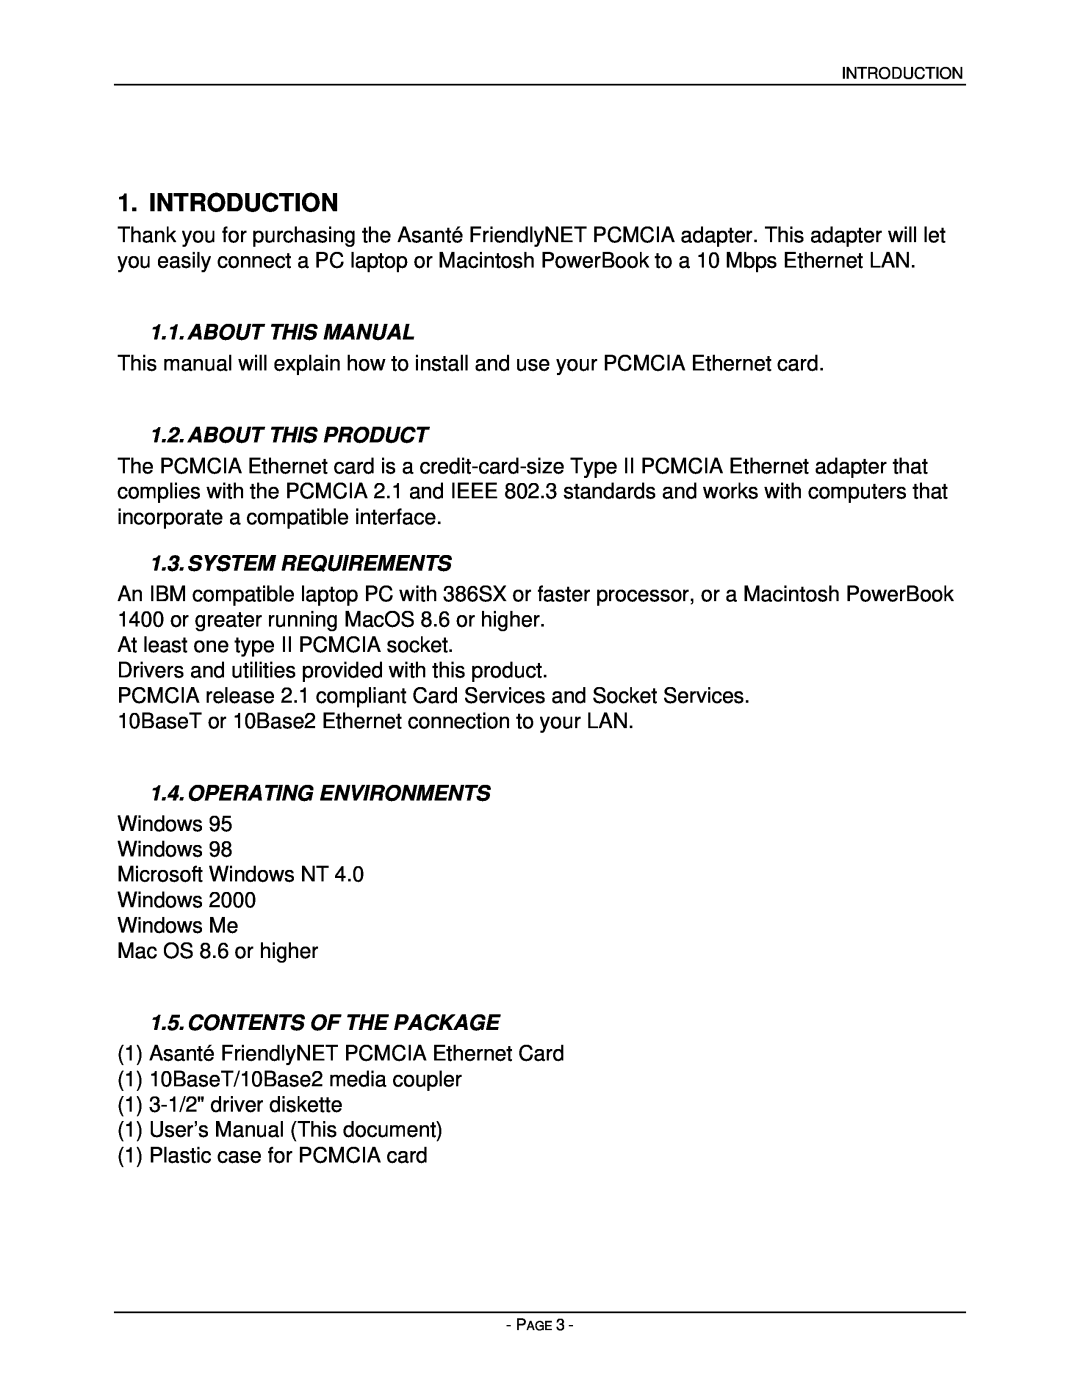 Asante Technologies PCMCIA user manual Introduction, About This Manual, About This Product, System Requirements 